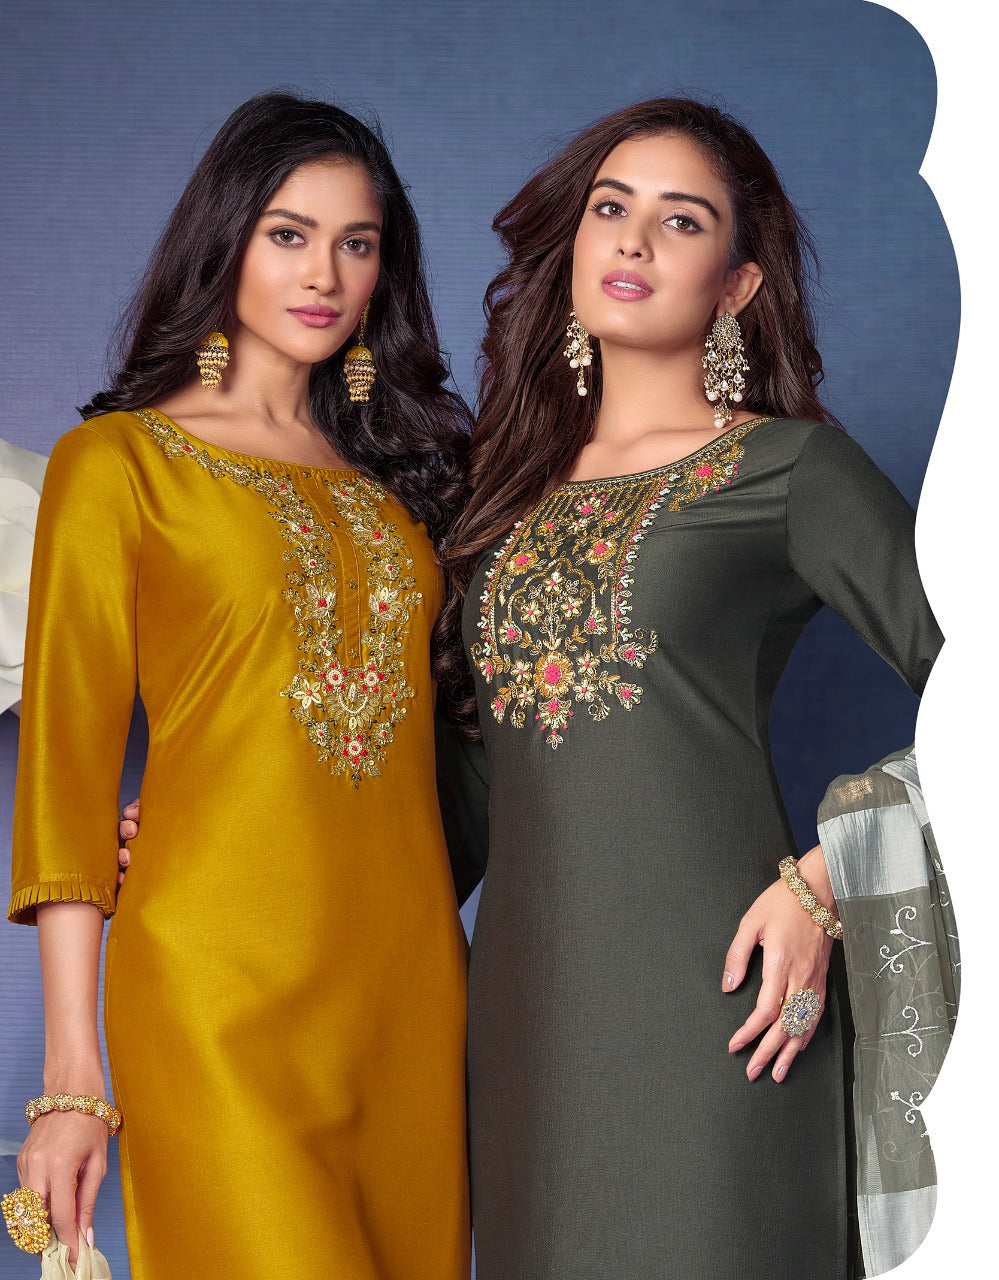 LILY AND LALI MAGNUM VOL 2 BEMBERG KURTI WITH BOTTOM AND DUPATTA Anant Tex Exports Private Limited